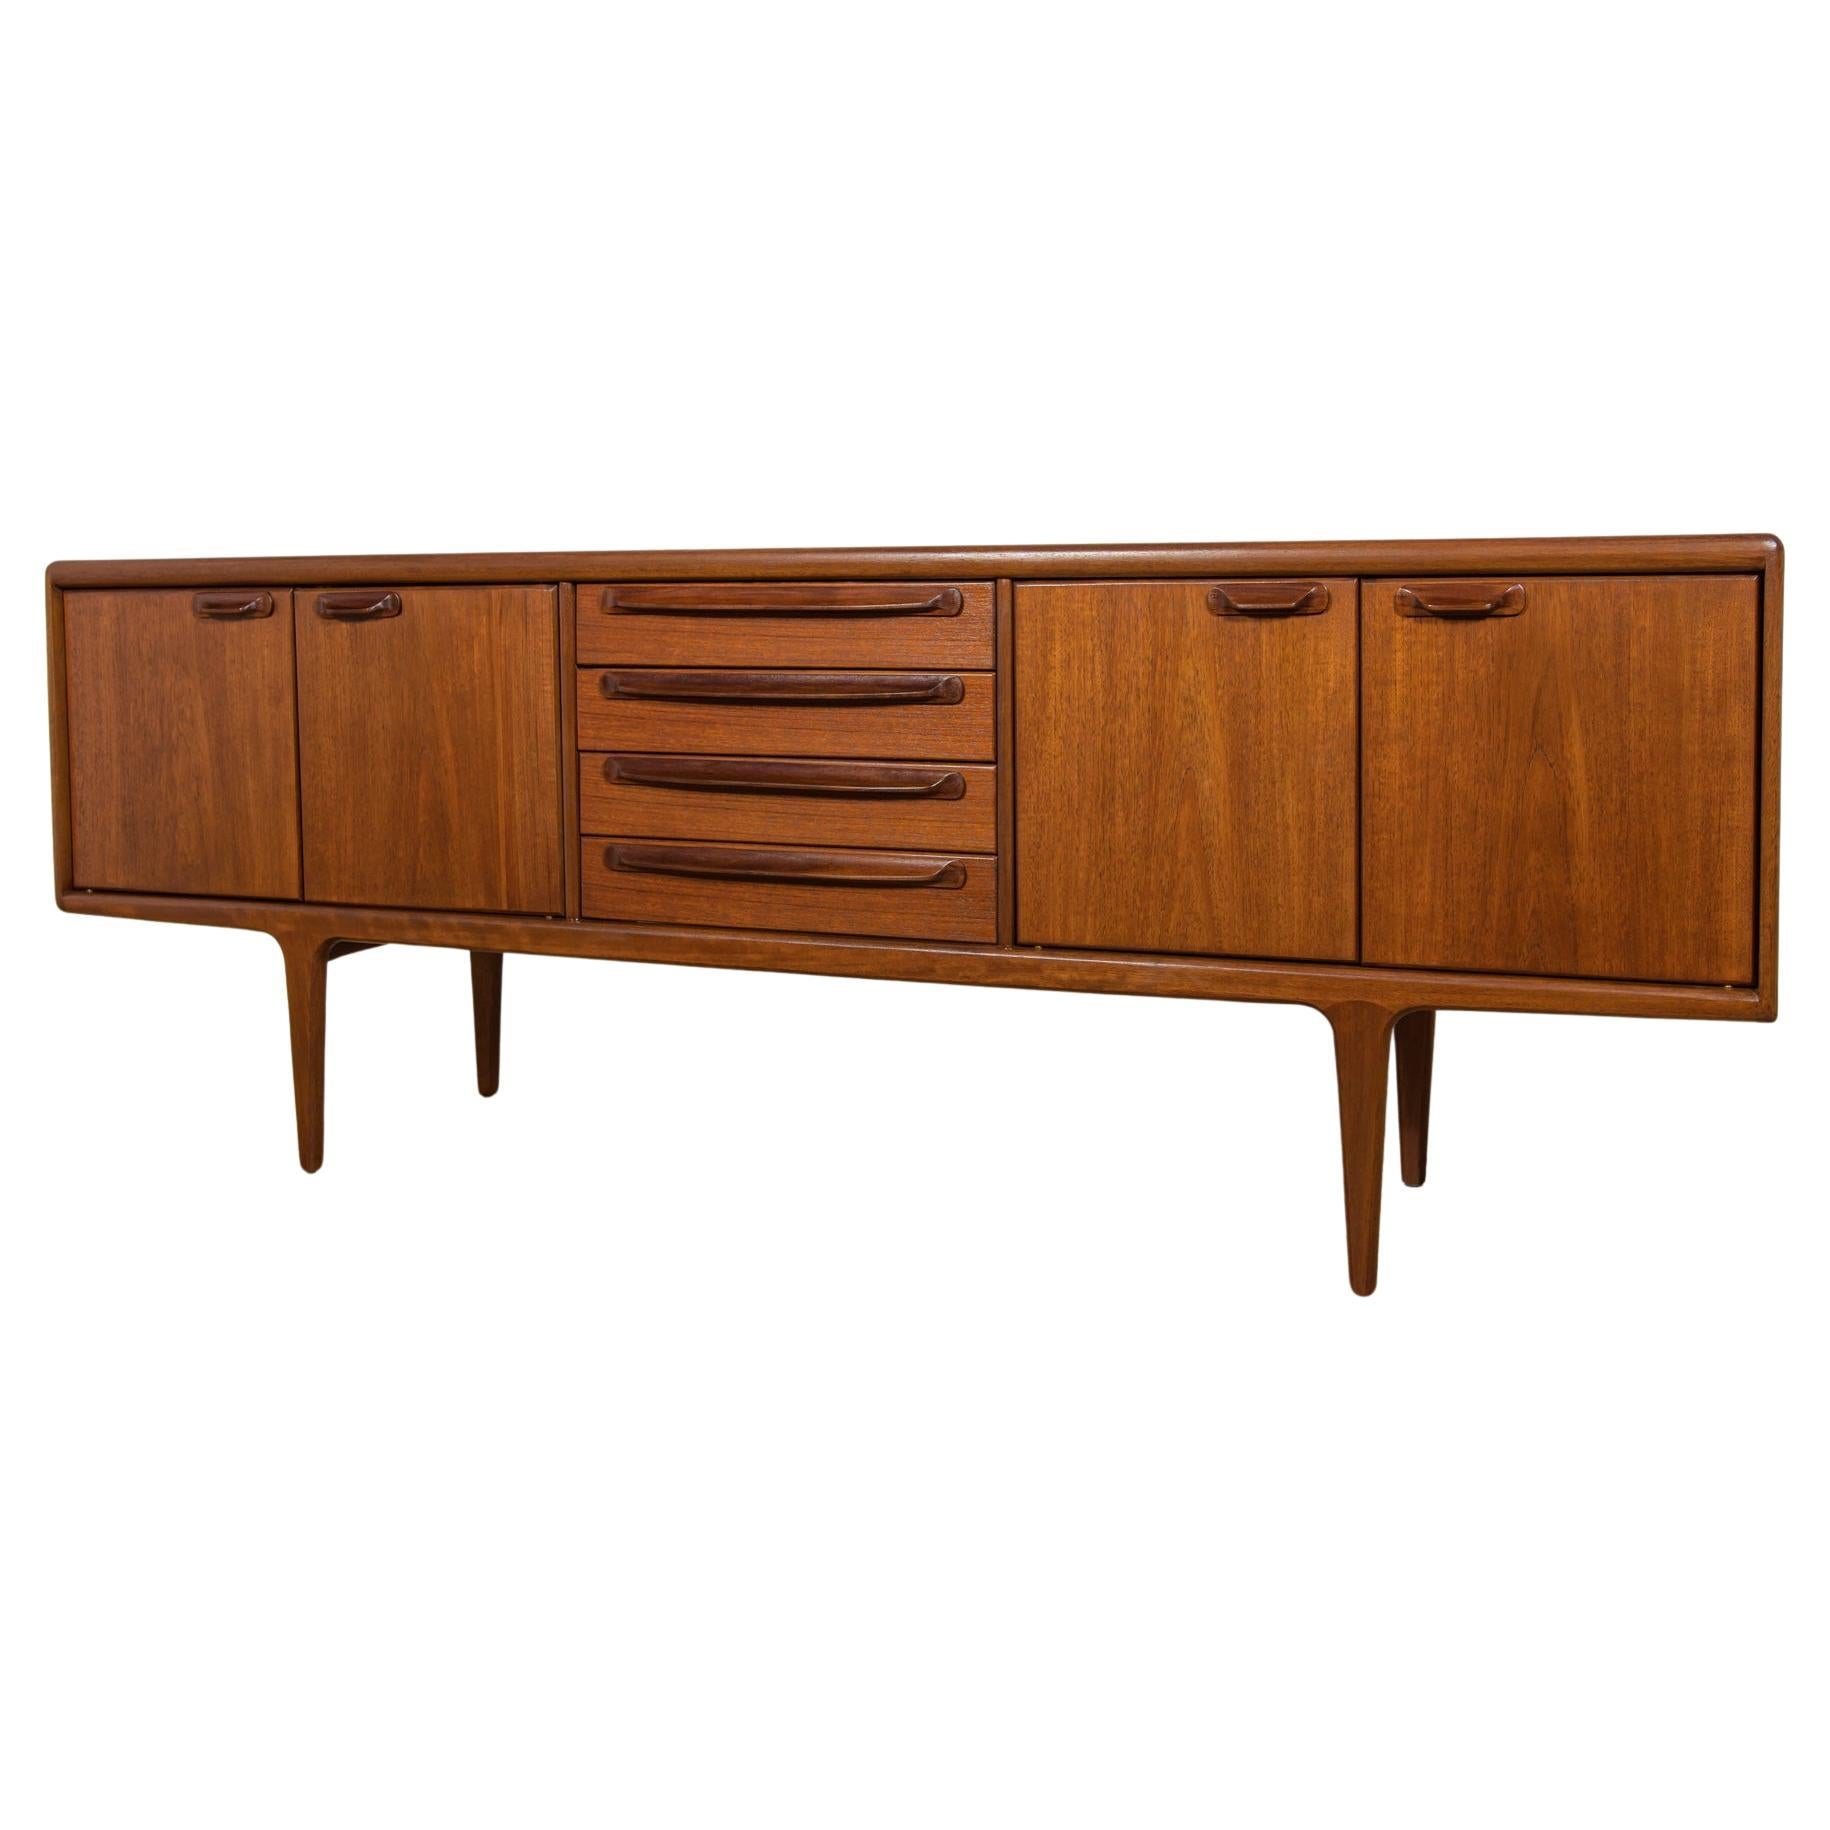 Mid-Century Teak Sideboard Model Sequence by John Herbert for A.Younger Ltd, Gre